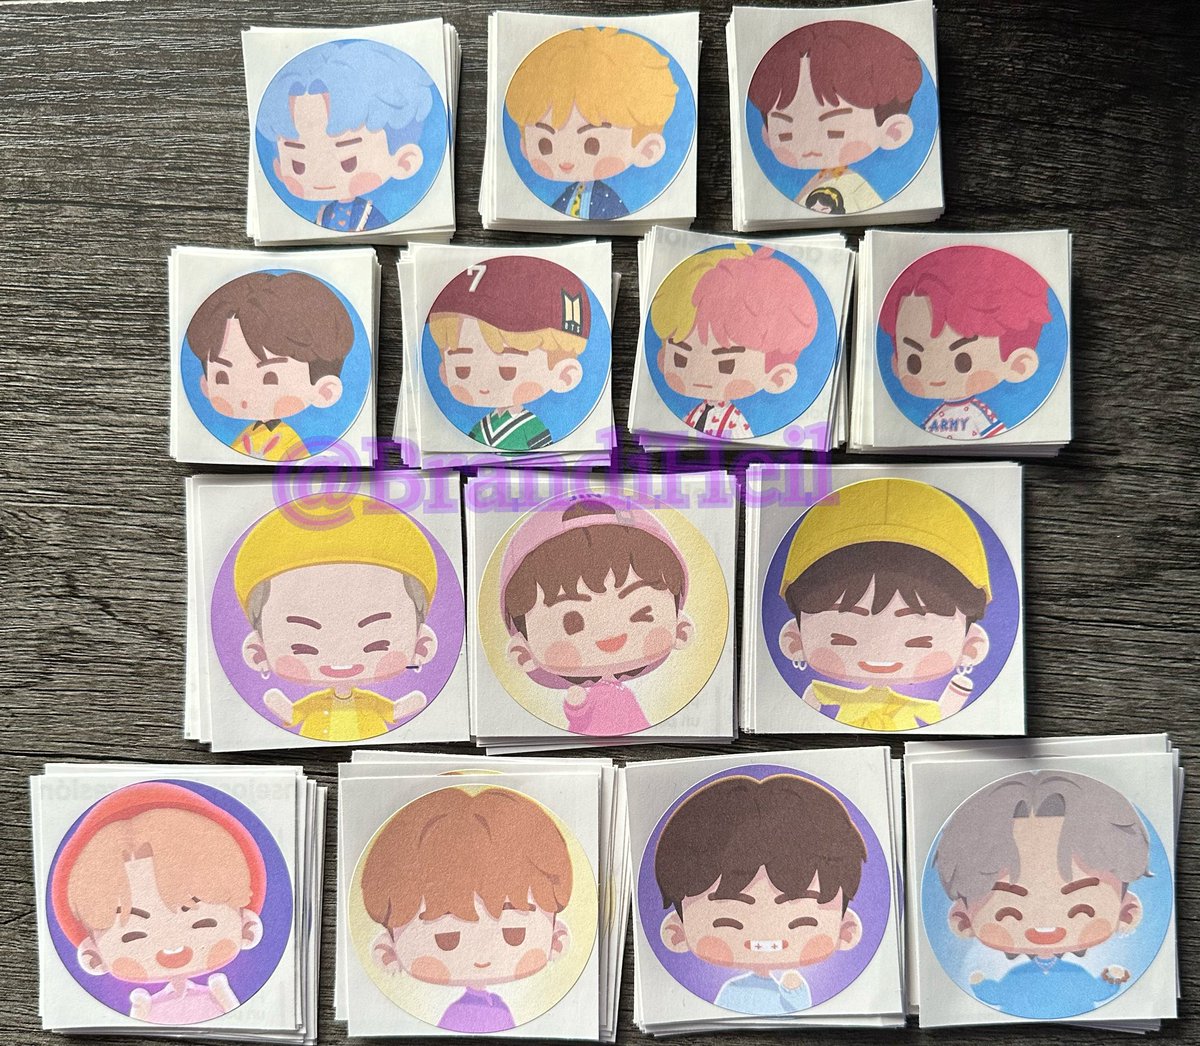 Stickers I made for GA freebies. Any interest if I do a GA for a set of these?